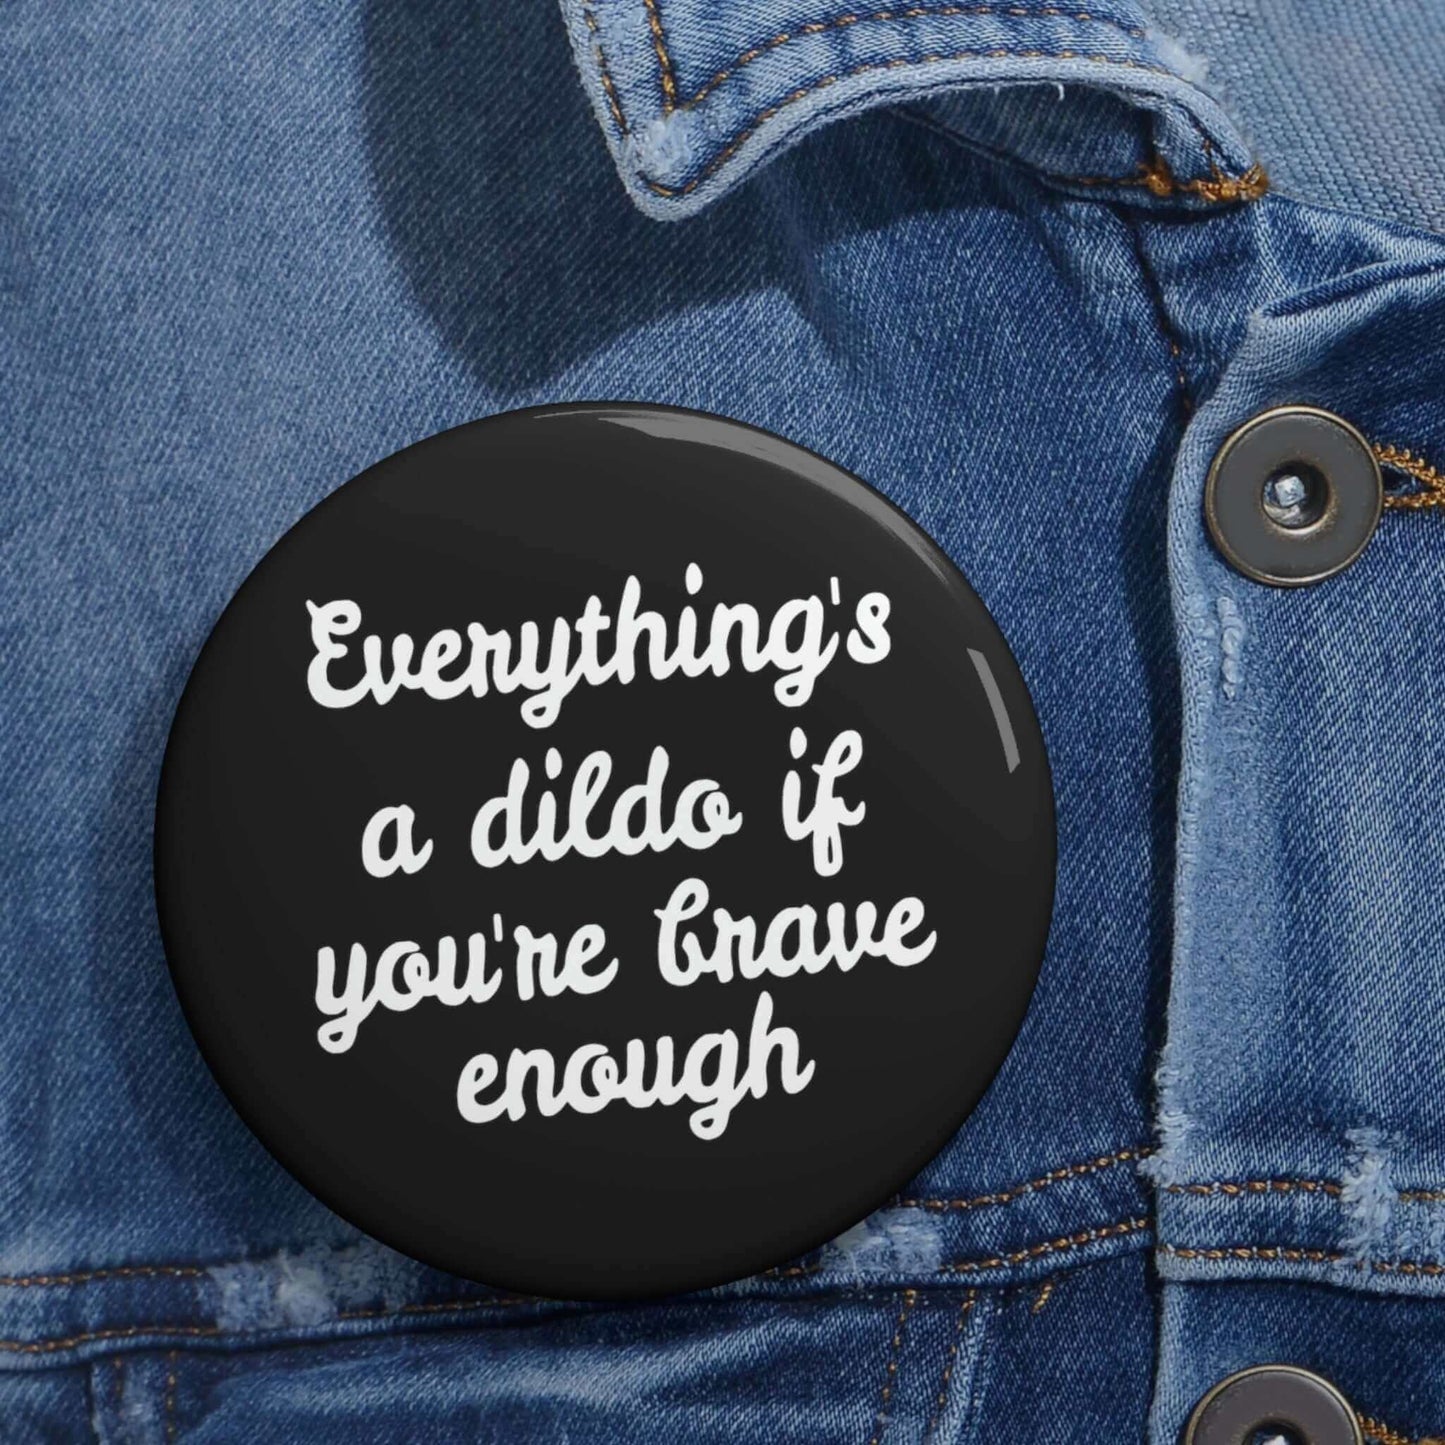 Witticisms r us button infographic.Black pinback button that says Everything's a dildo if you're brave enough.